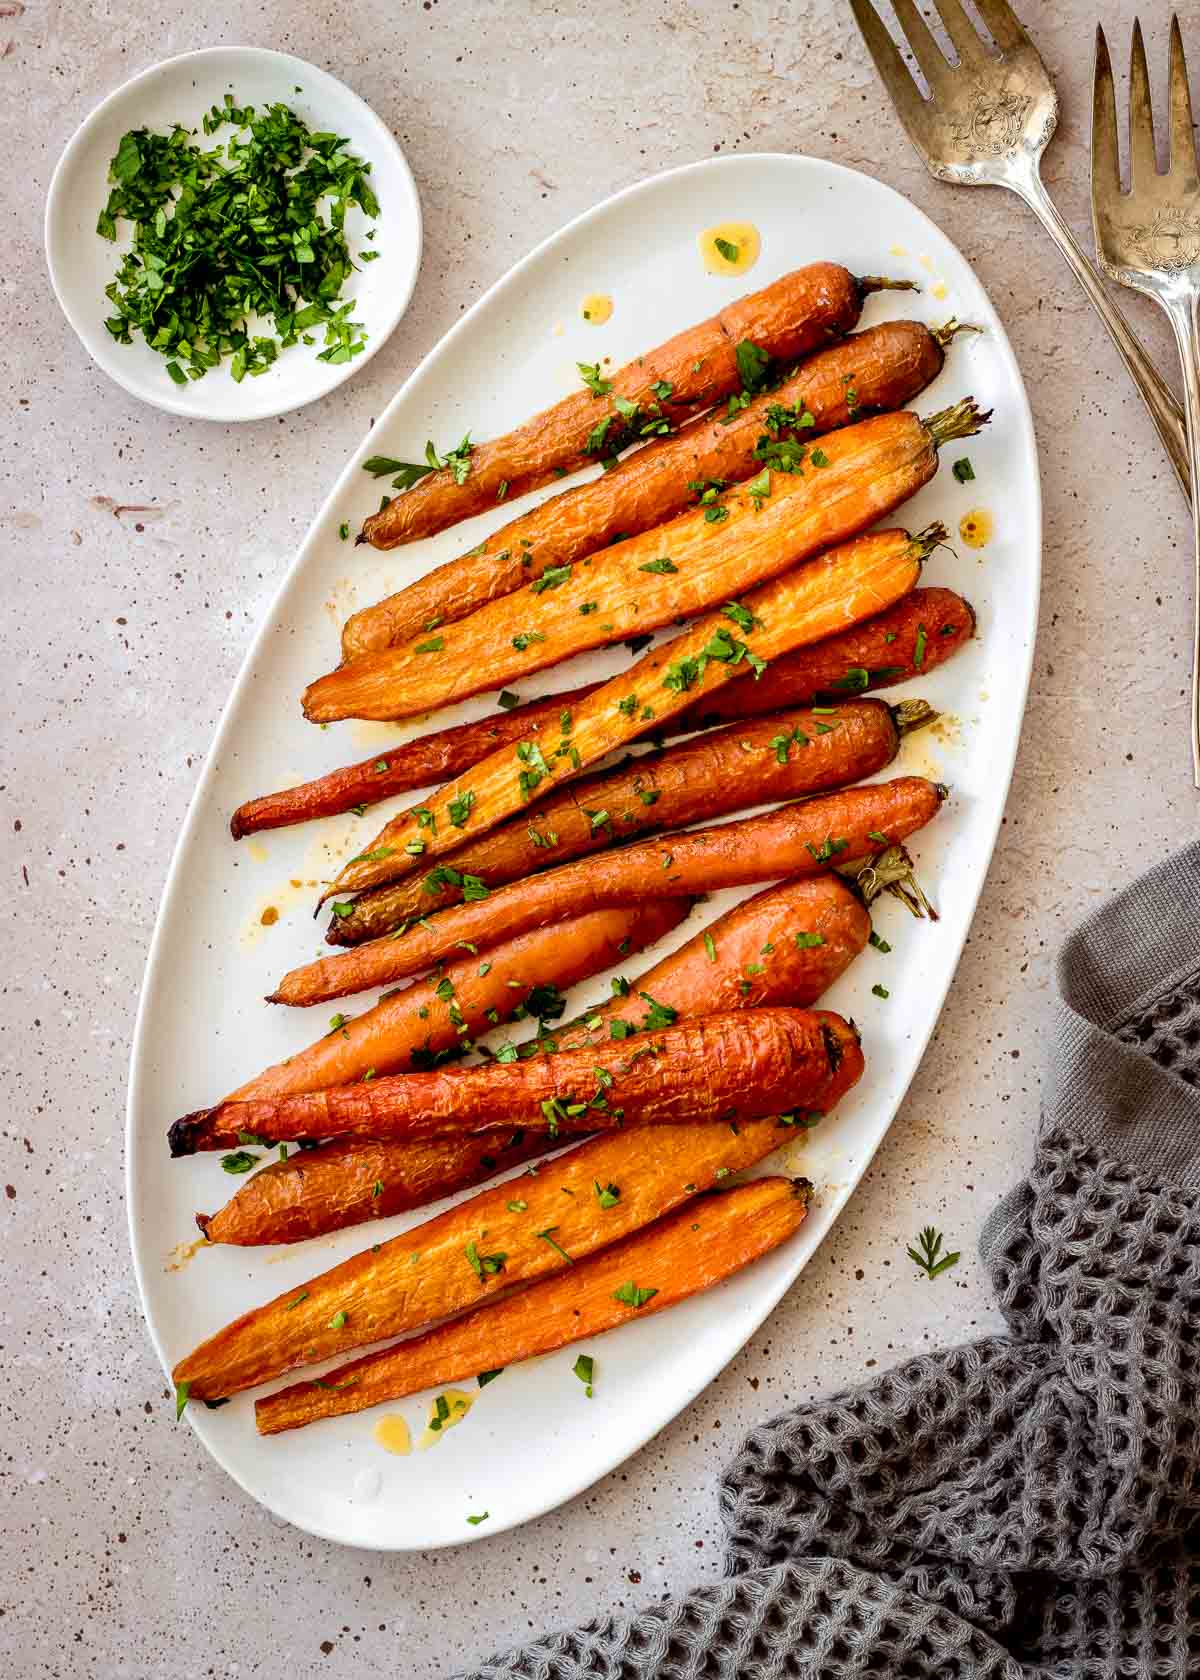 Halved roasted carrots with maple syrup sit on a white oblong plate, decorated with chopped parsley. More parsley, a tea towel and two large silver serving forks are nearby.